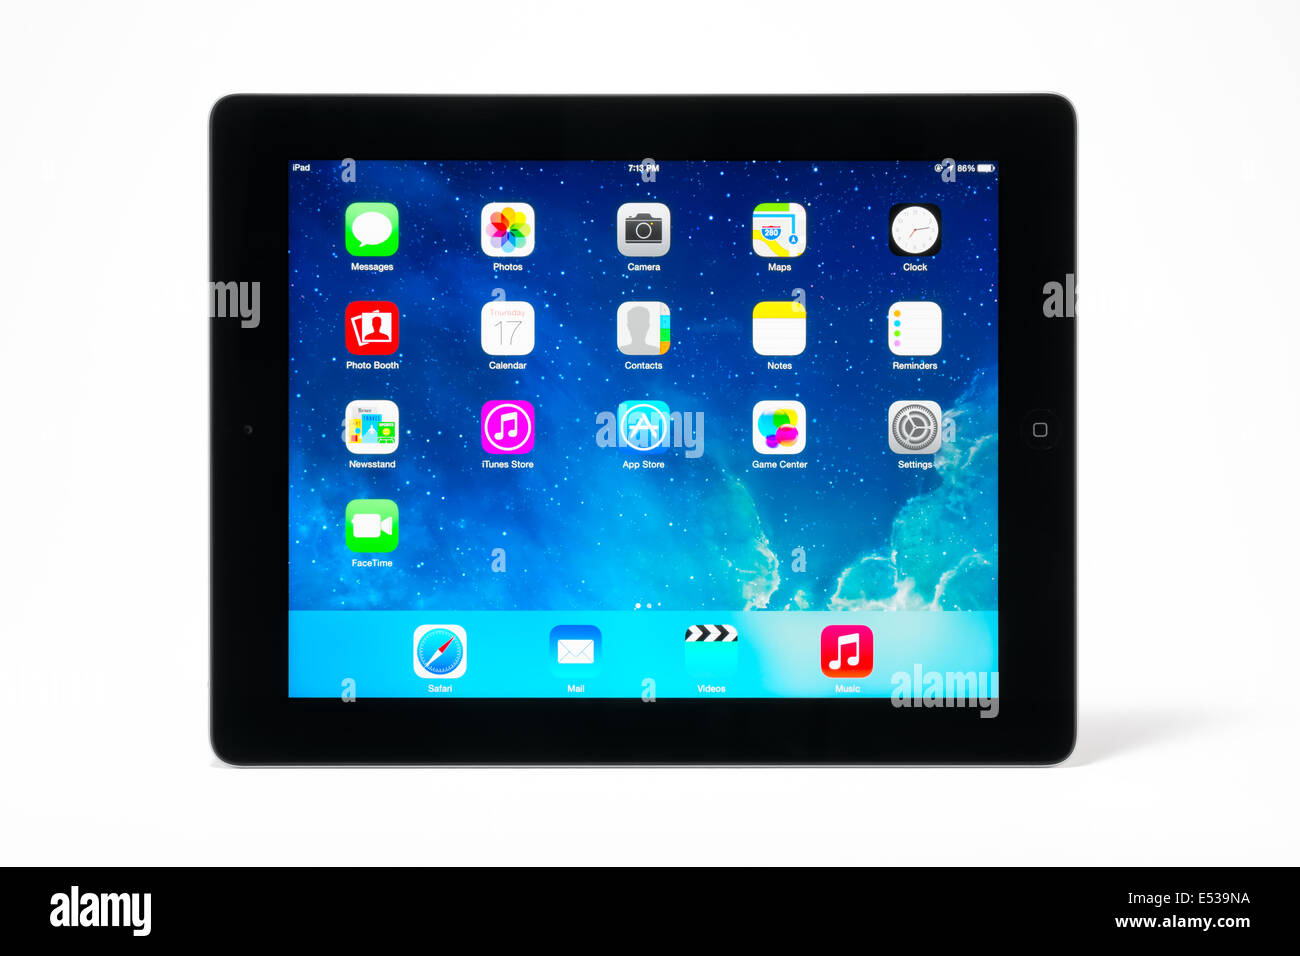 Manila,Philippines - July 17, 2014: Apple Ipad 4th generation (Retina Display) with with iOS 7 home screen. Stock Photo